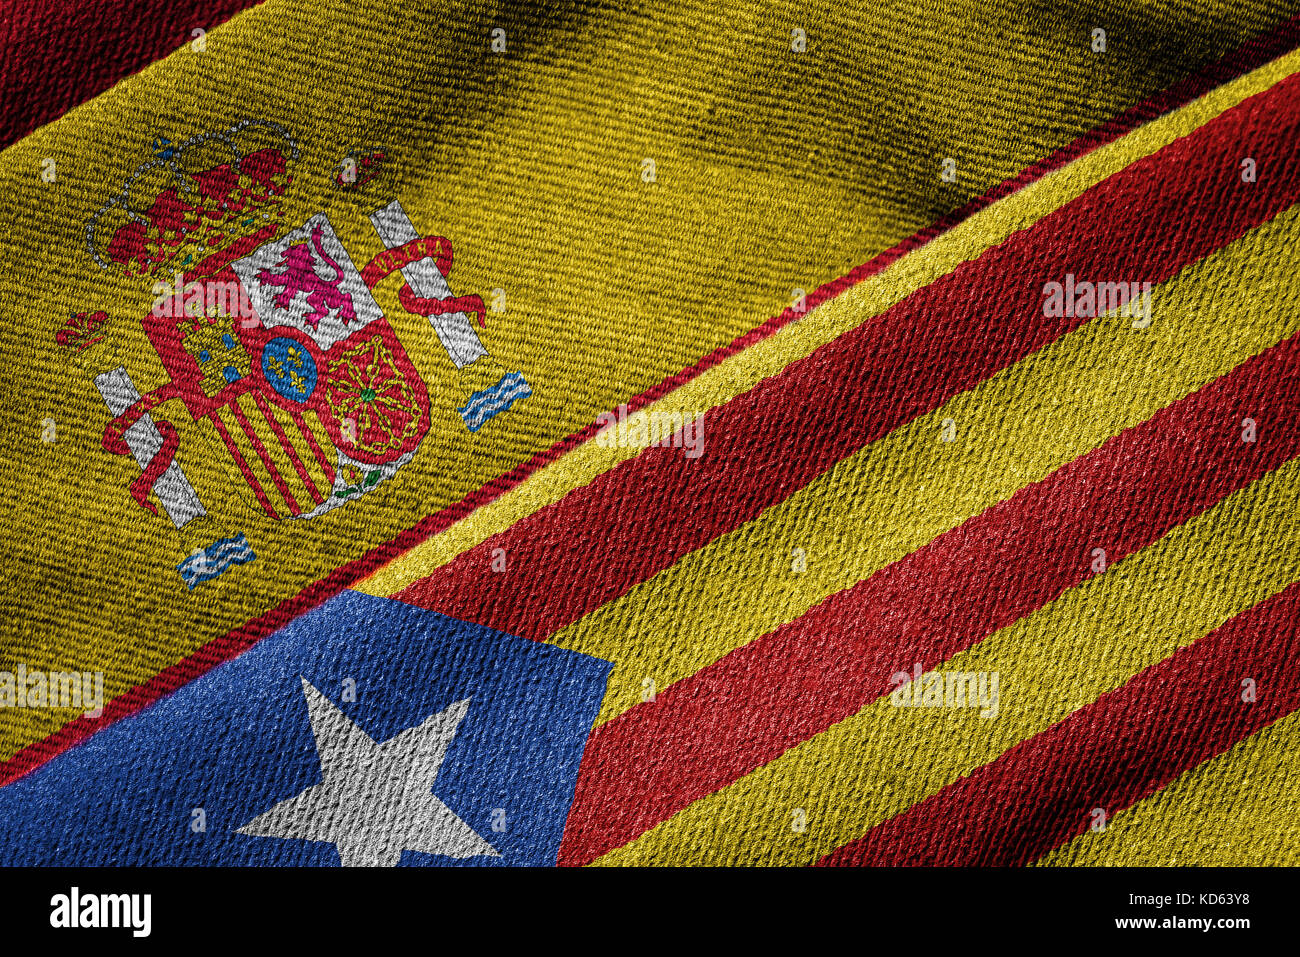 3D rendering of the flags of Spain and Catalonia on woven fabric texture. Detailed textile pattern and grunge theme. Concept of separatist referendum. Stock Photo